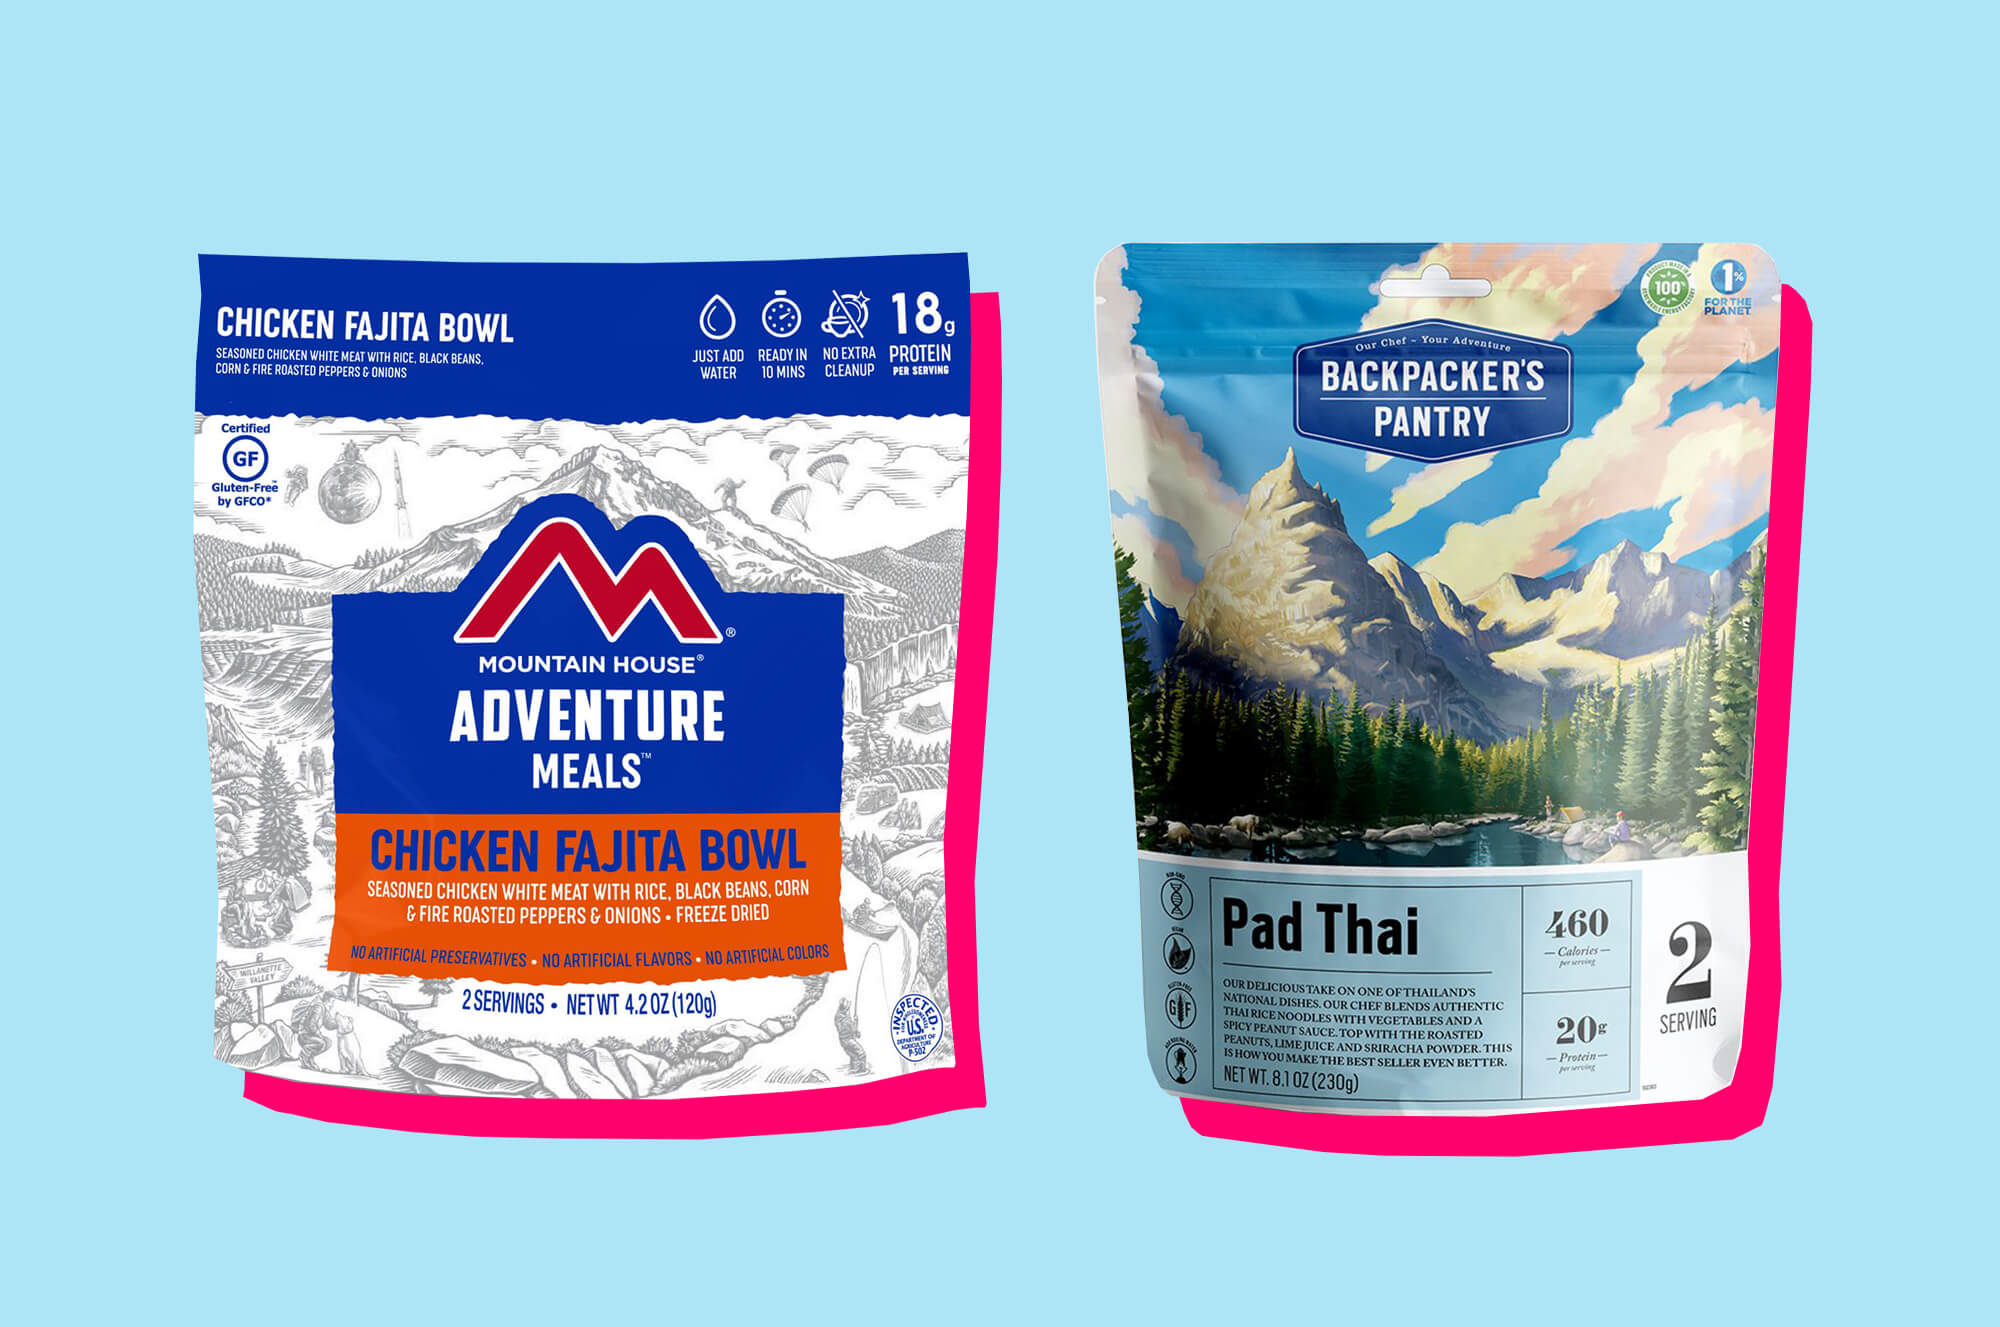 Backpackers Pantry vs. Mountain House: Who Makes Better Meals?